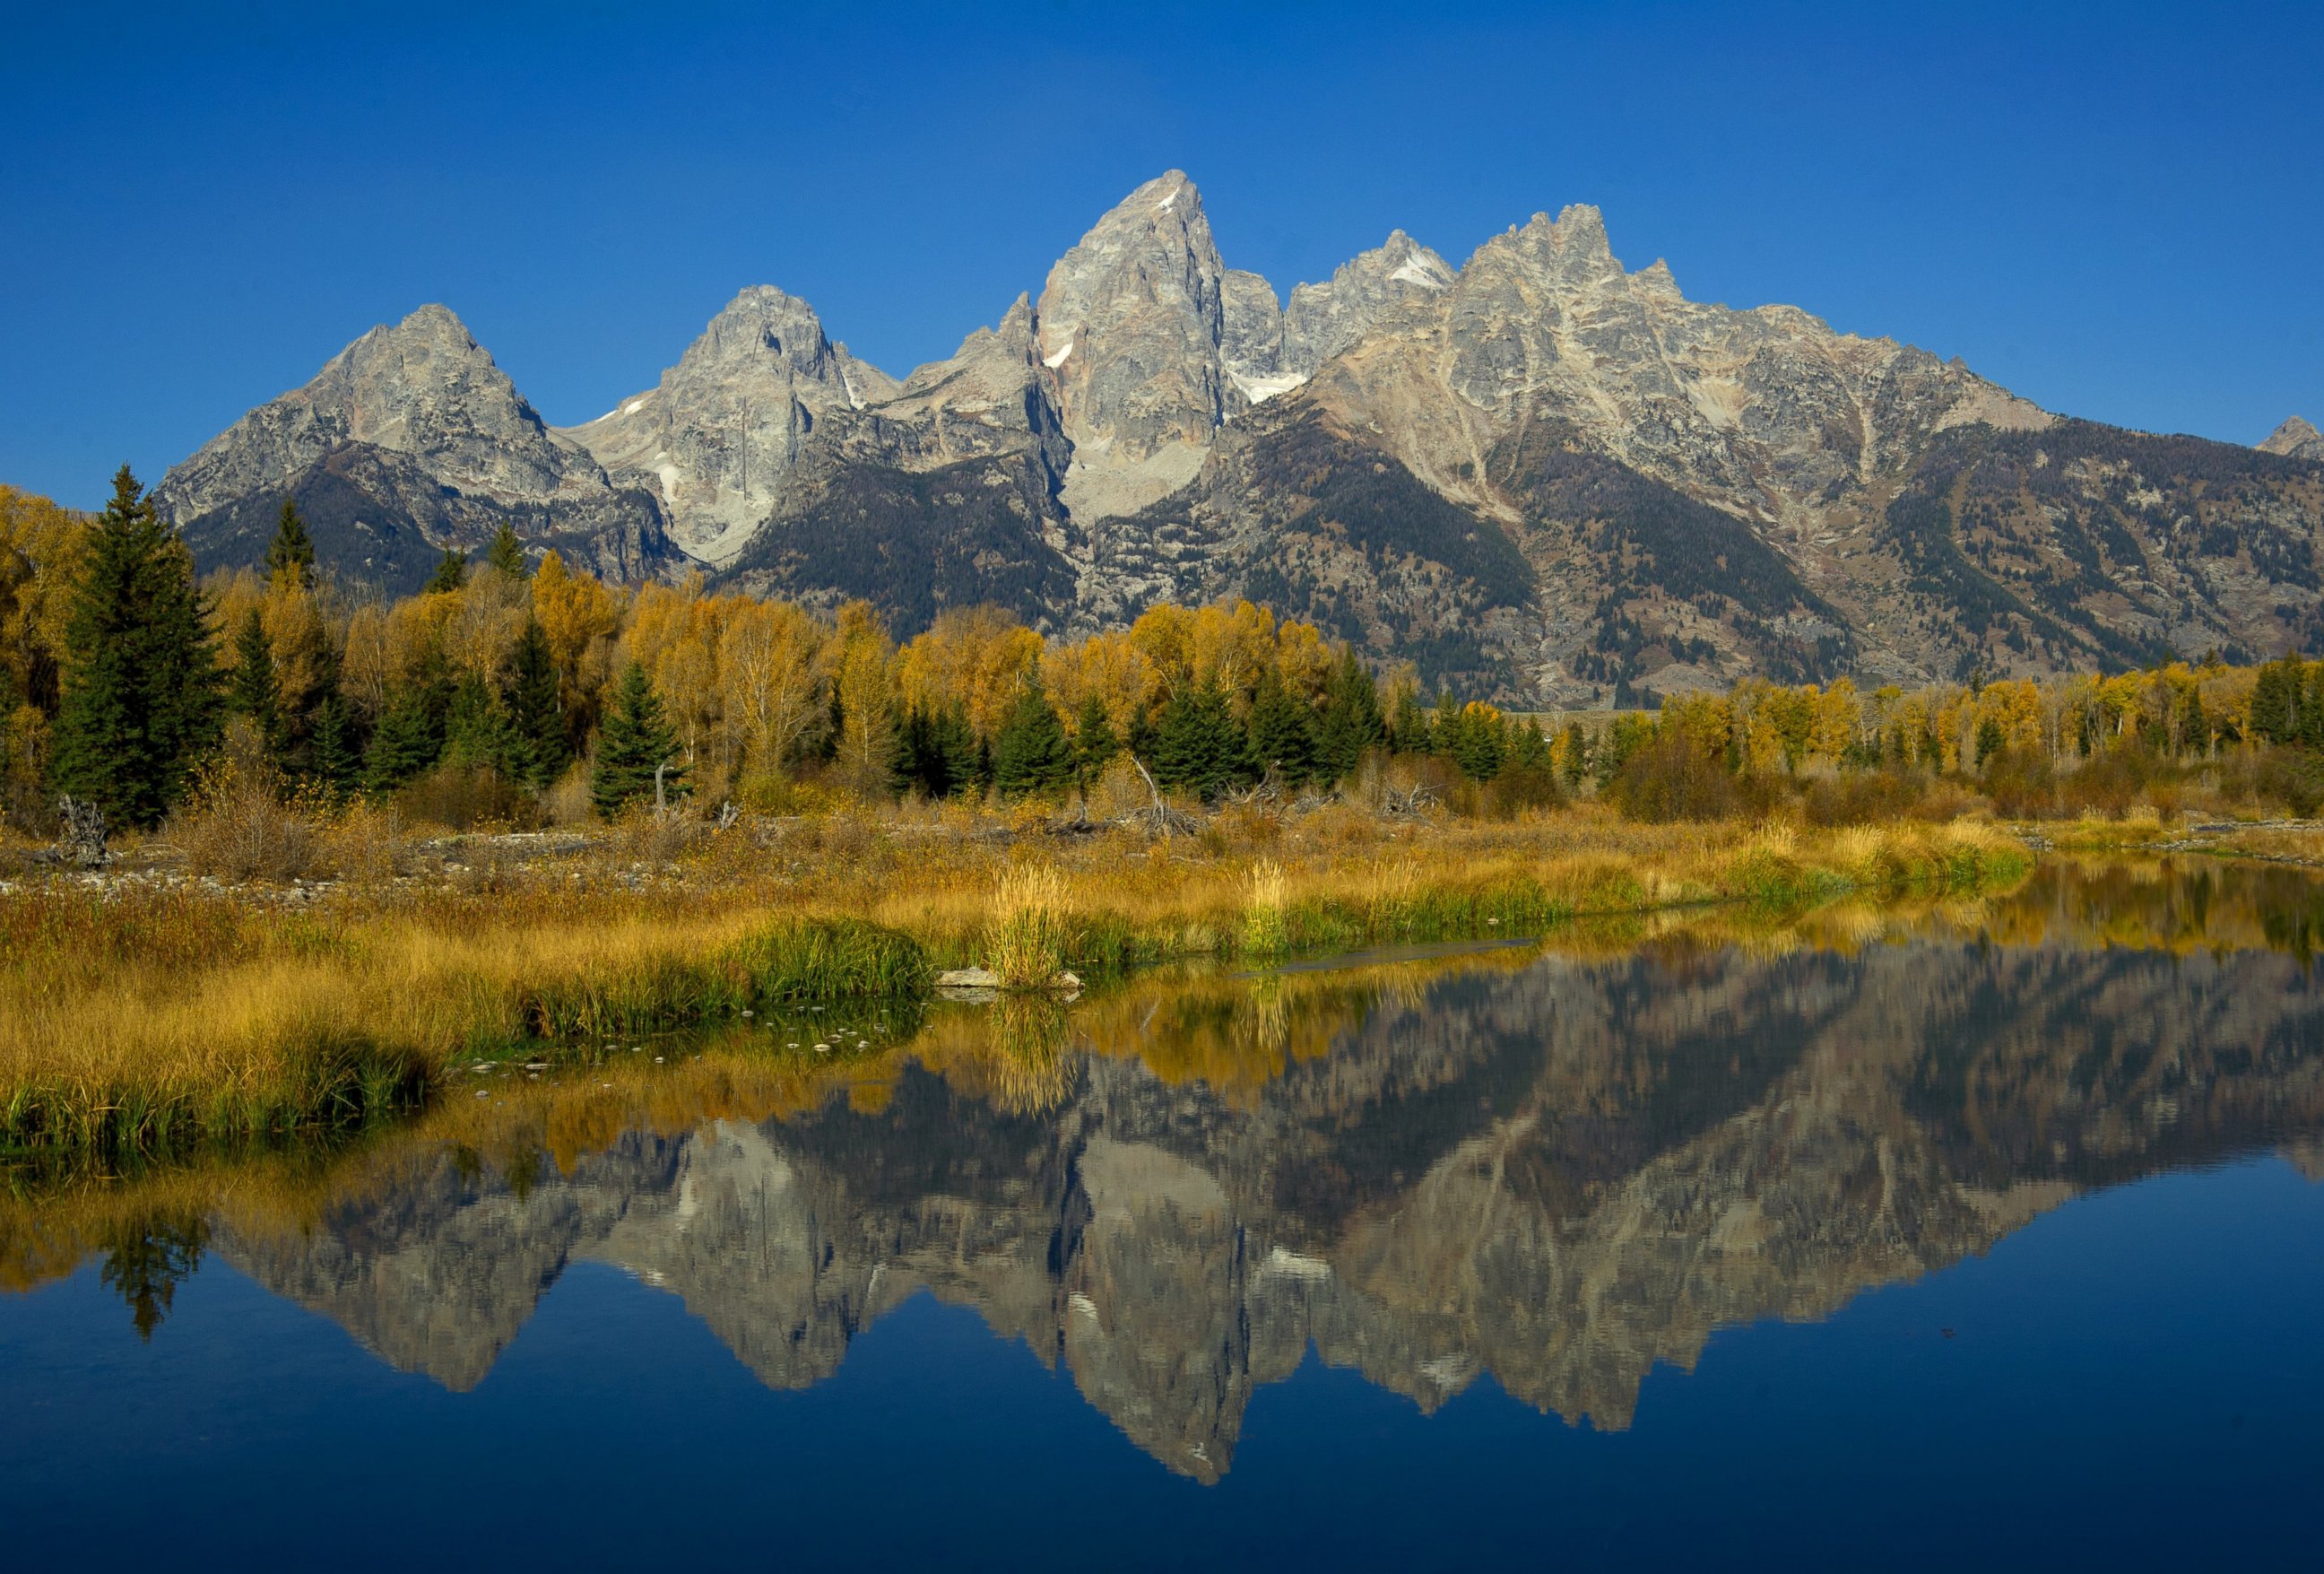 PHOTO: The Grand Tetons are seen on Oct. 4, 2012 in the Grand Teton National Park in Wyoming. 